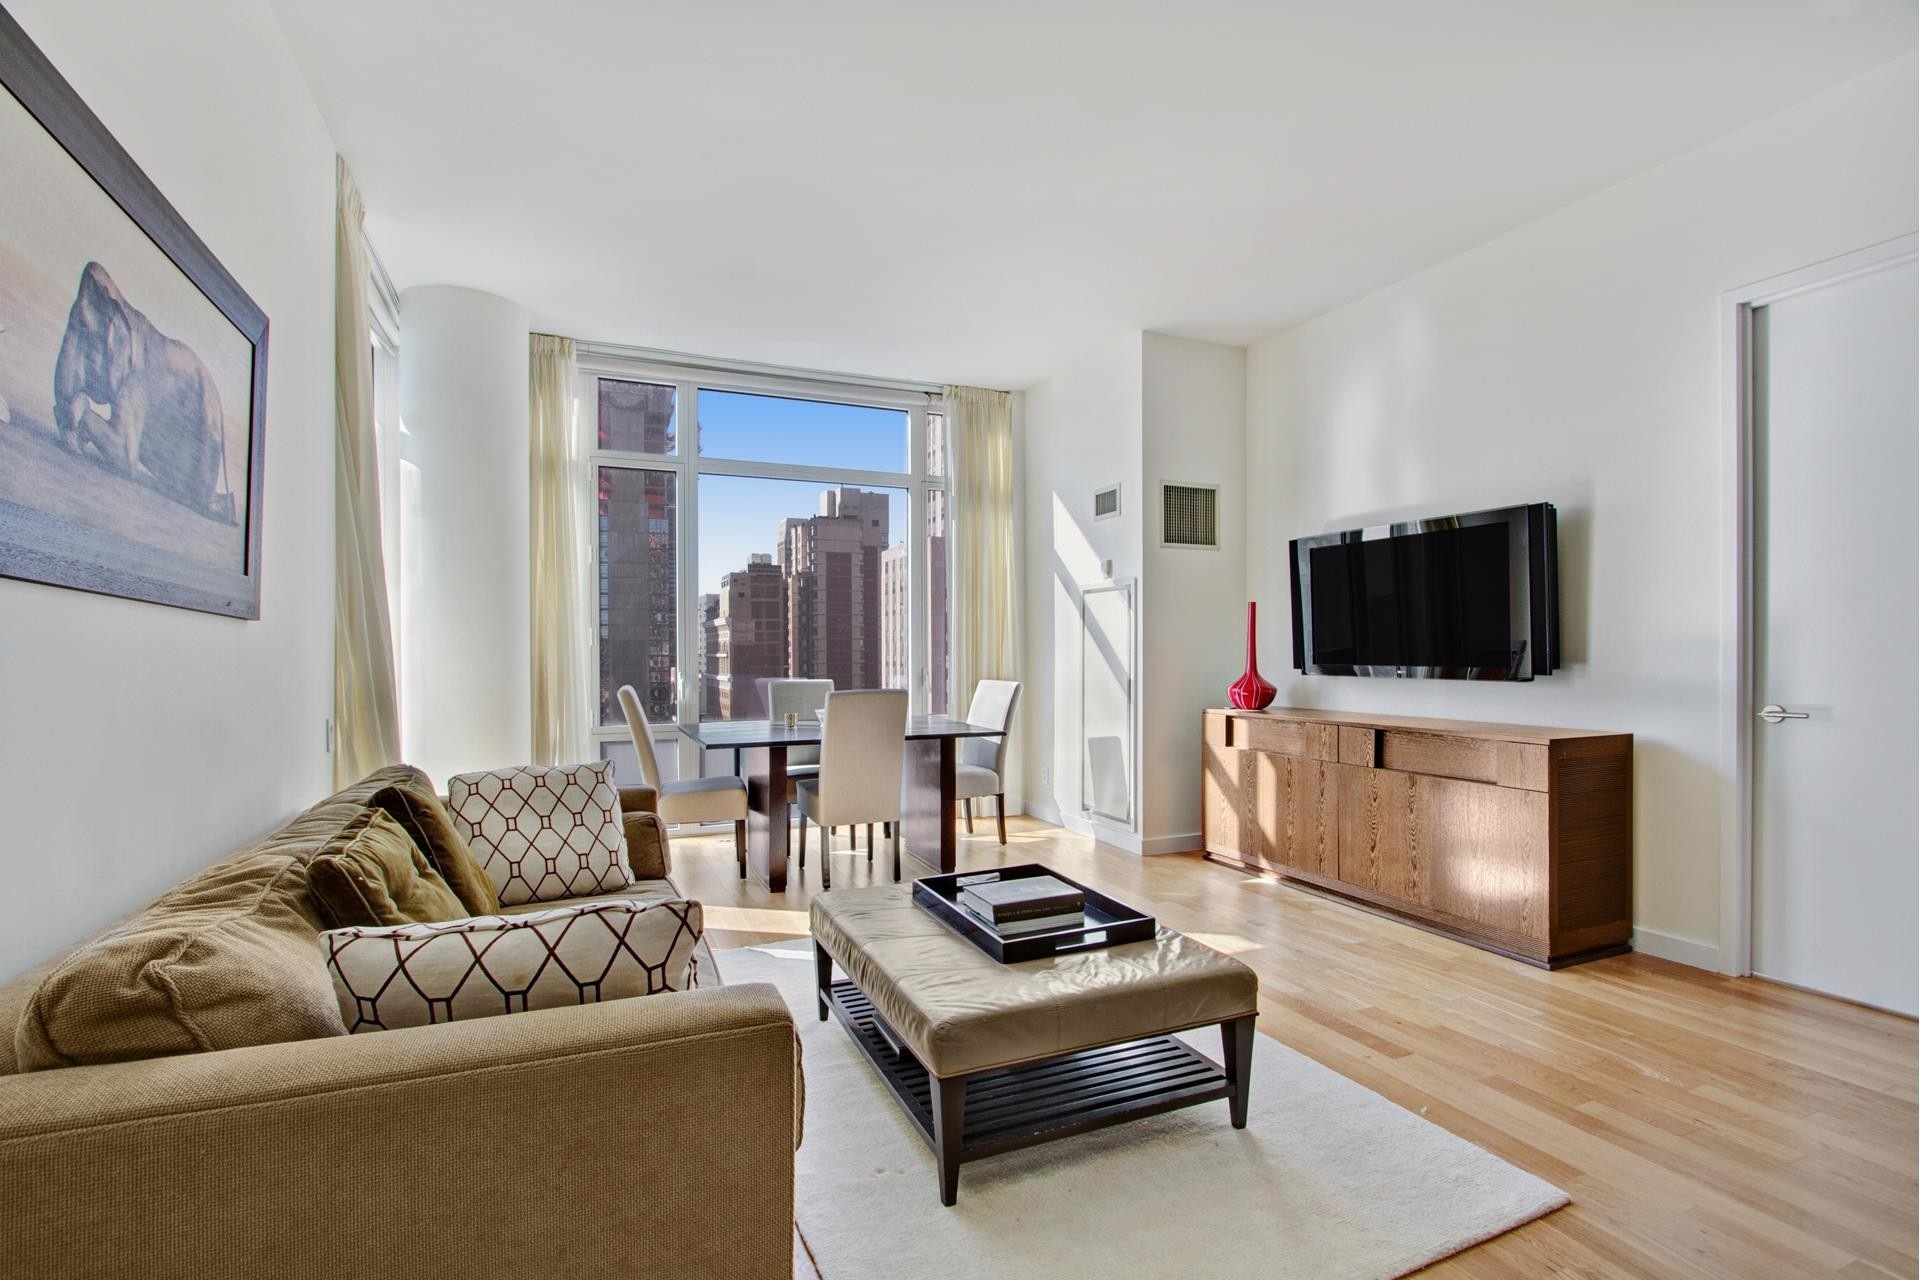 Condominium at 325 Fifth Avenue, 28A Midtown South Central, New York